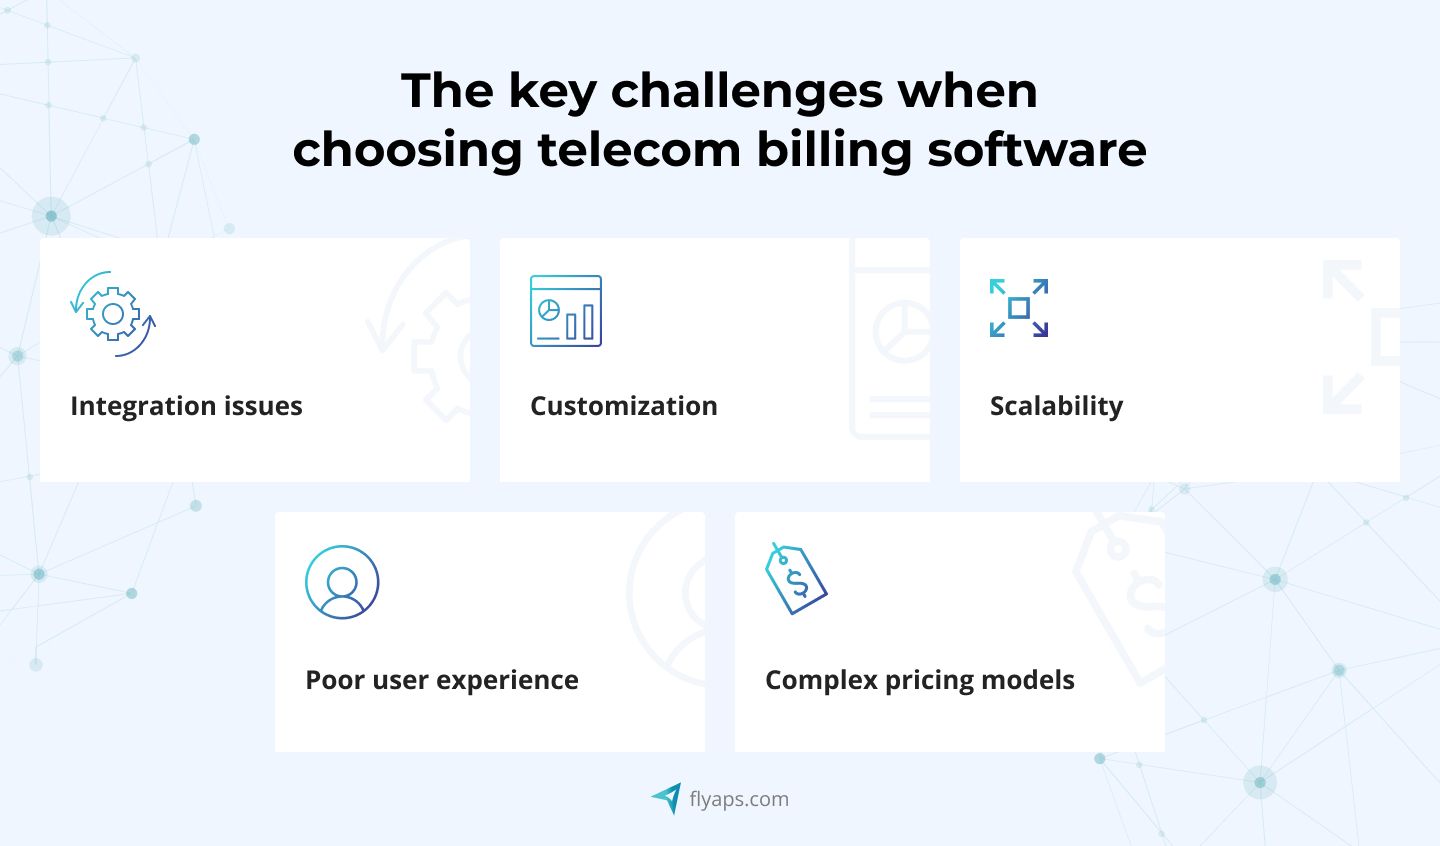 The key challenges when choosing telecom billing software